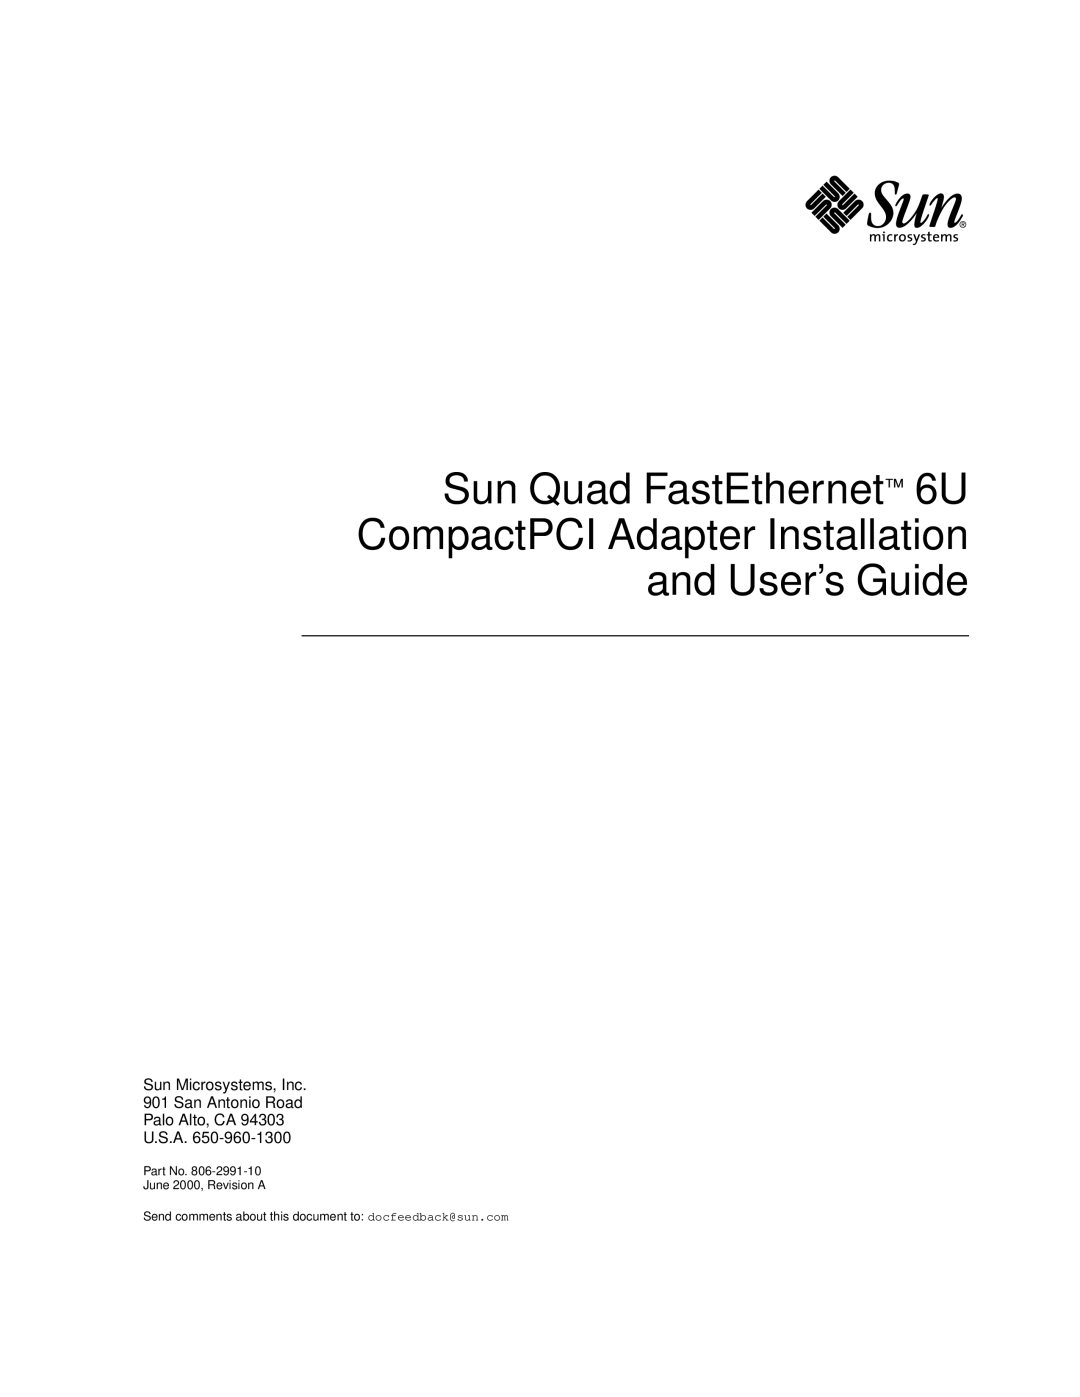 Sun Microsystems manual Sun Quad FastEthernet 6U CompactPCI Adapter Installation, and User’s Guide 